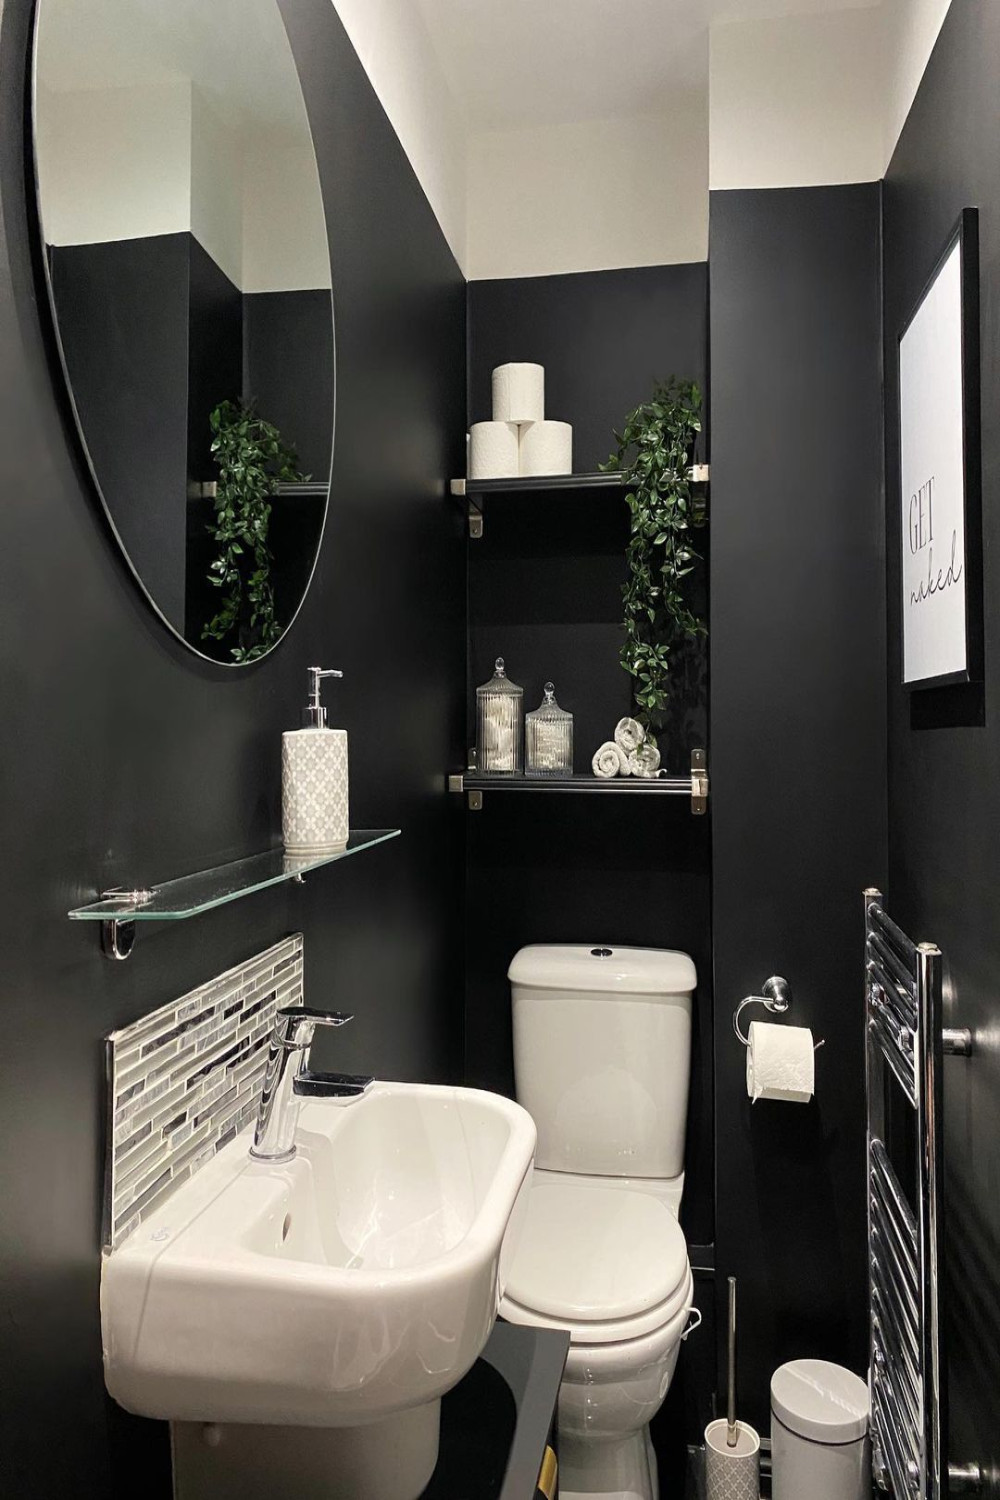 Ways to Decorate With Black in the Bathroom